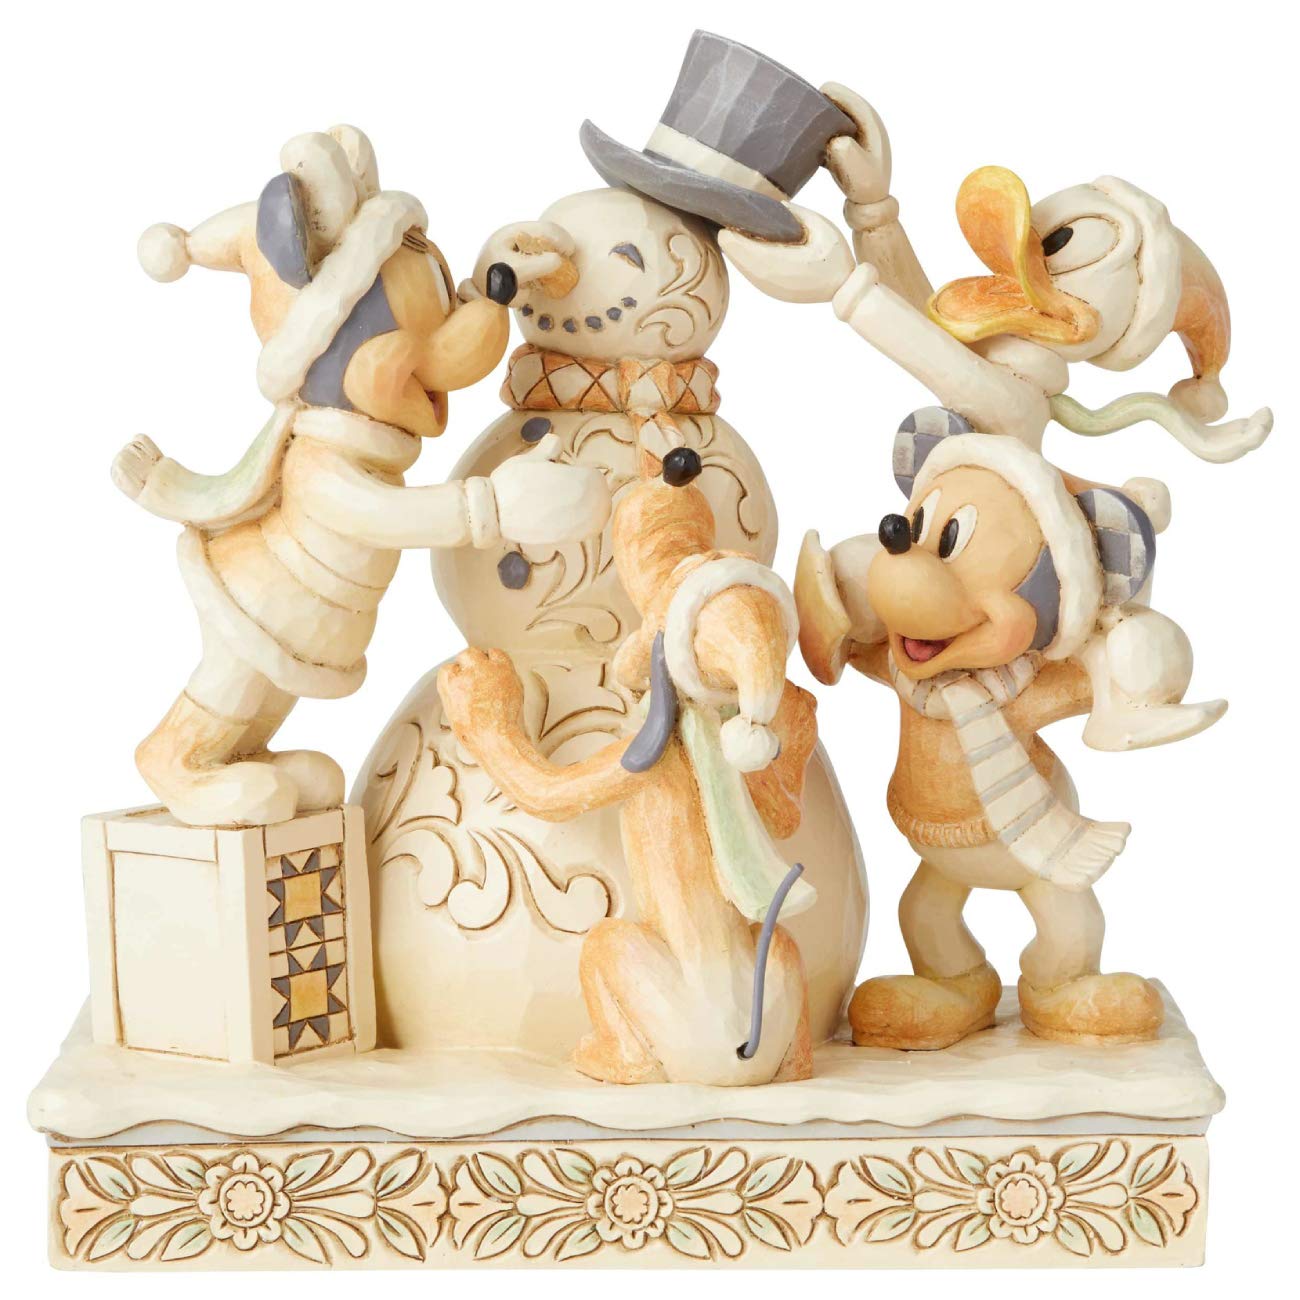 Fab 5 bygger snemand White Woodland, Fab 5 Figur - White Woodland, Disney Figur, Disney Traditions by Jim Shore Figur, Mickey Mouse Figur, Anders And Figur, Pluto Figur, Minnie Mouse Figur, Disney figur, Disney figurer, alle Disney figurer, eventyrfigur, eventyrfigurer, eventyrlig figur, eventyrlige figurer, magisk figur, magiske figurer, Disney jul, Disney julepynt, Disney ornament, Disney juleophæng, Disney shop, Disney butik, Disney butikDK, Disney butik I Danmark, juletræspynt, jul, julepynt, juleophæng, julekugle, Disney julekugle, fra alle os til alle jer, Disney juleshow, højtid, julefigur, julefigurer, julegave, gaveide, Disney gave, Disney julegave, julepynt, 6002828